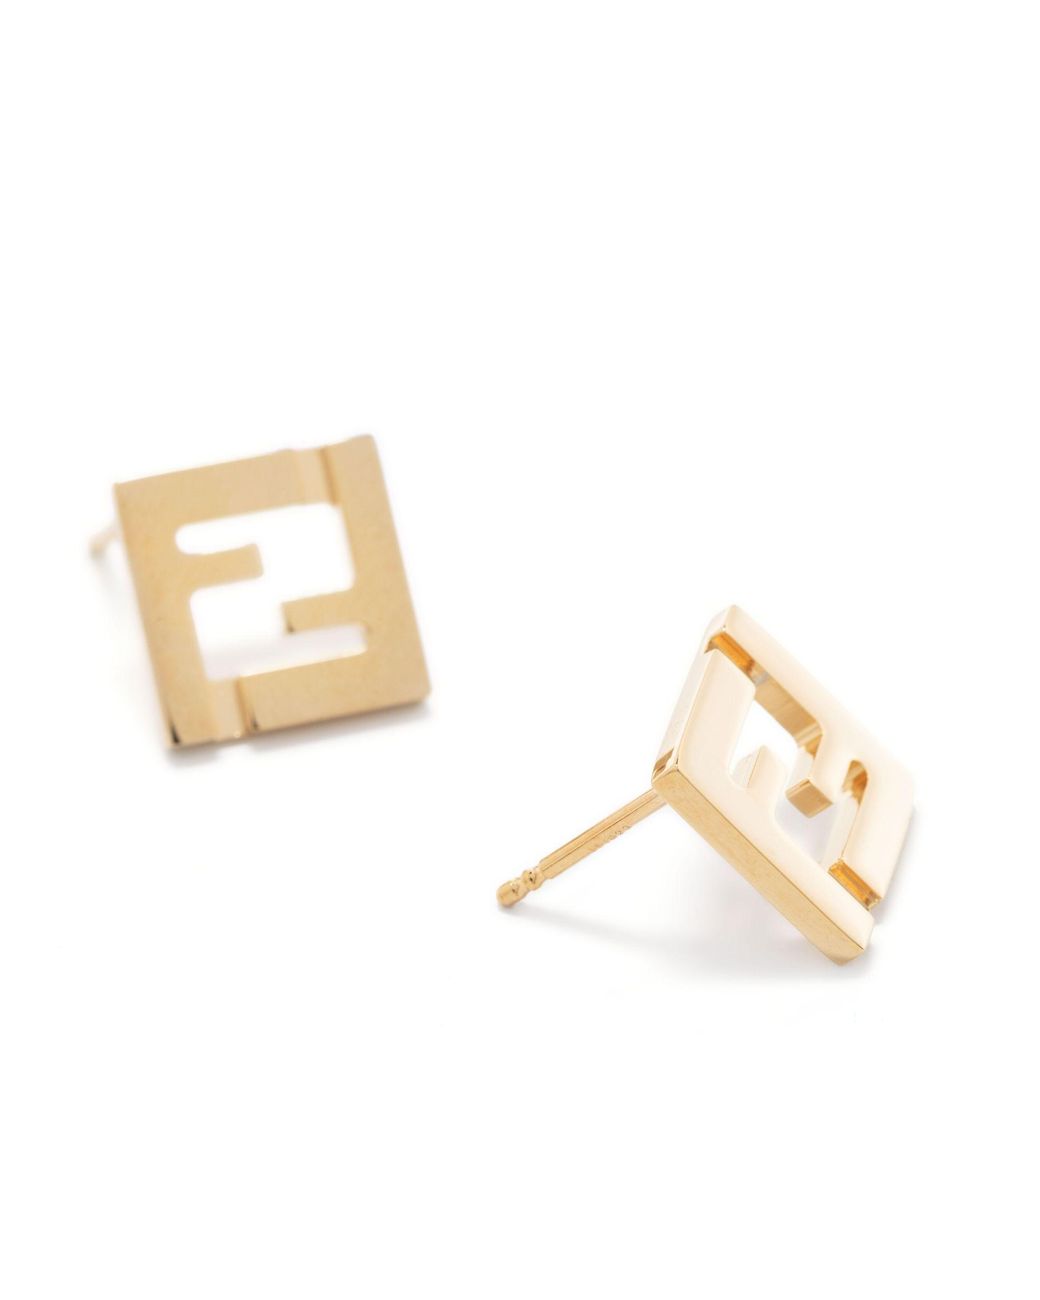 90s Fendi Stud Earrings, a Rare Couture of Pair of Iconic Oversize Vintage,  With FF Logo Signature on Top - Etsy Hong Kong